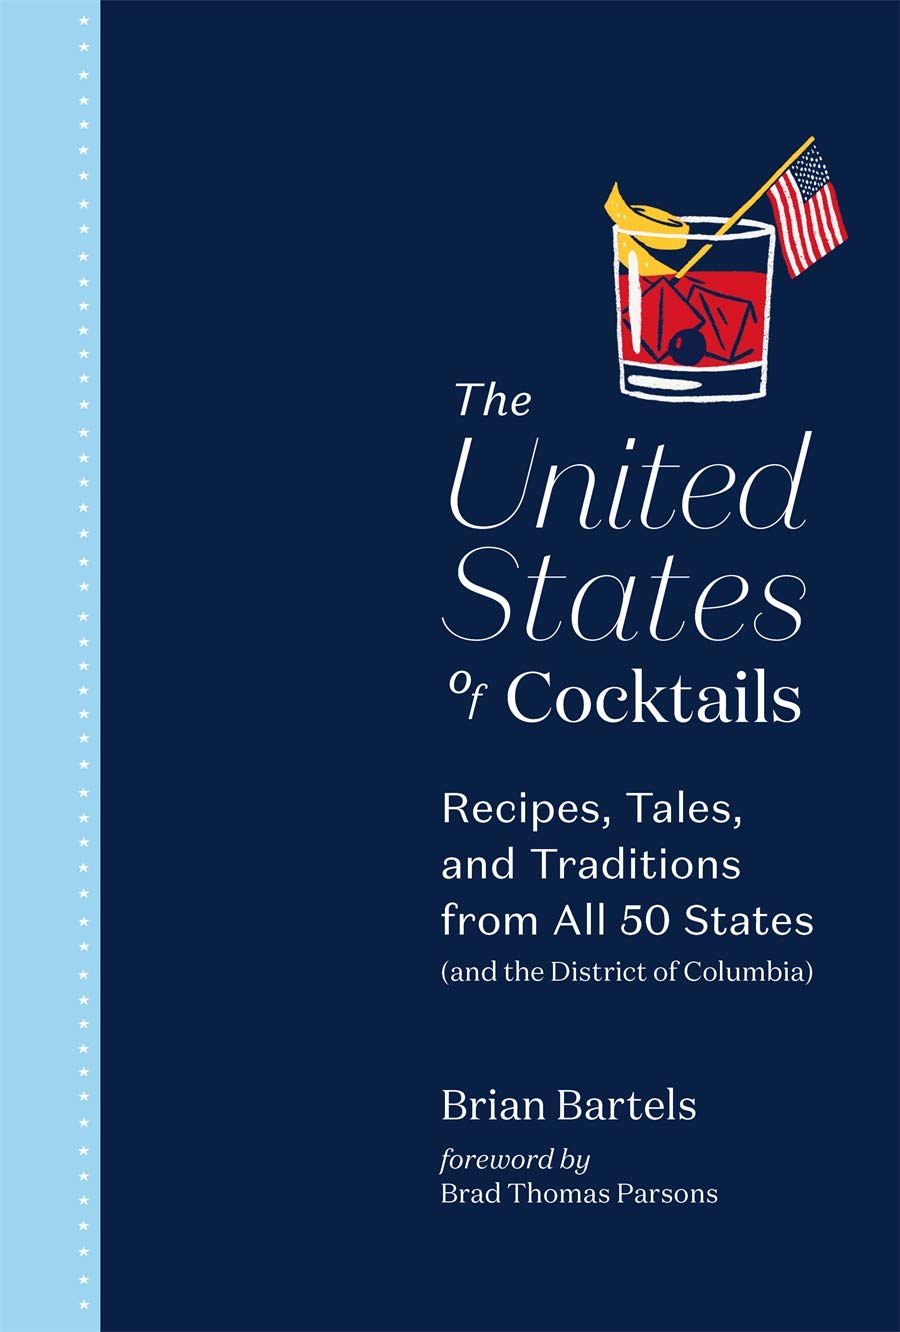 The United States of Cocktails: Recipes, Tales, and Traditions from All 50 States